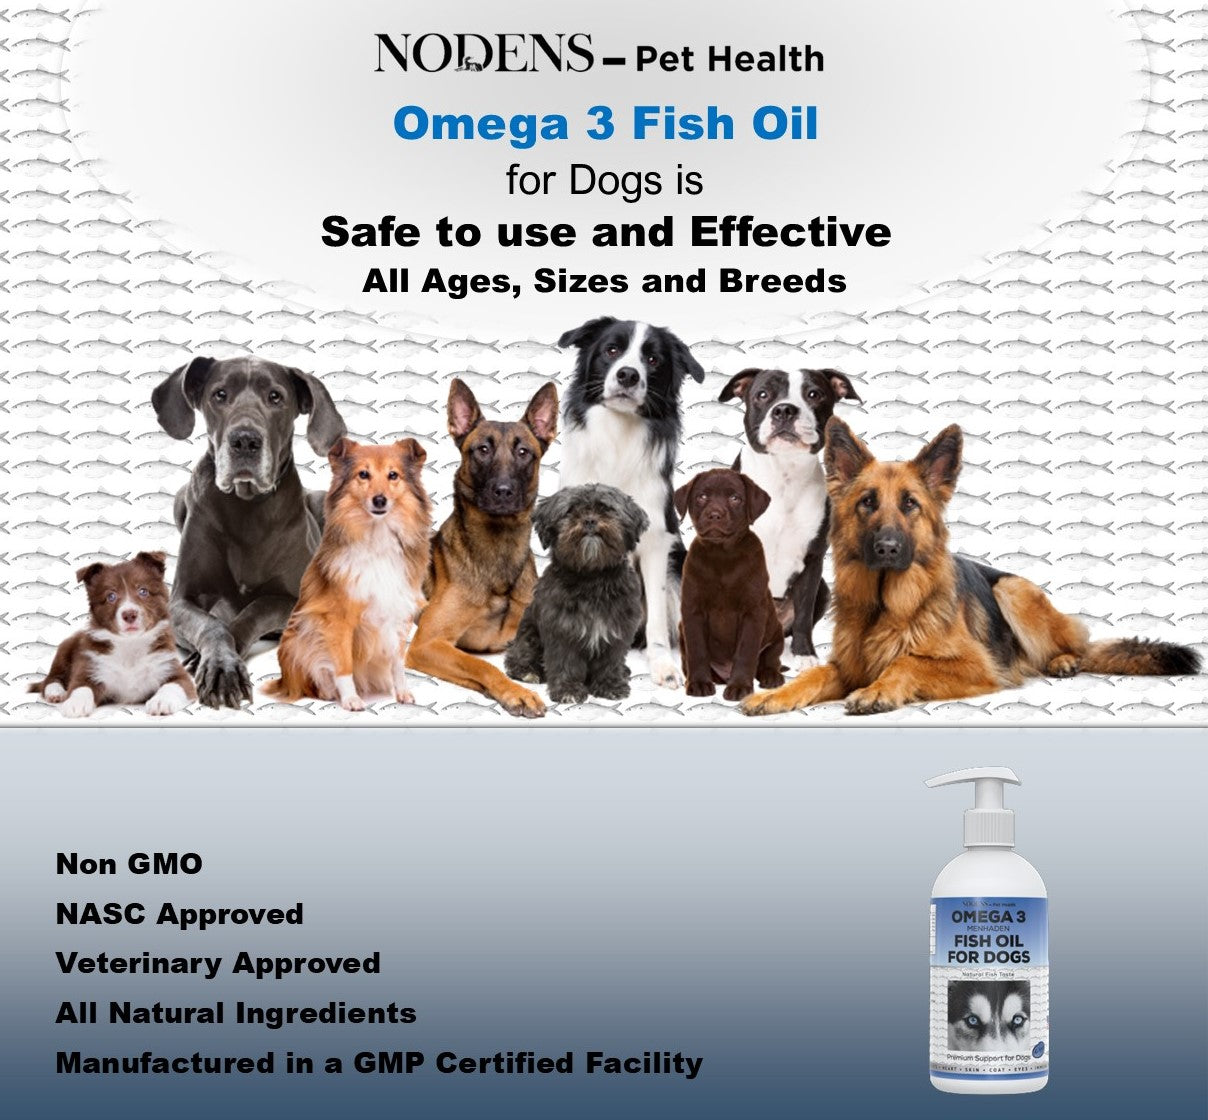 Nodens Omega 3 for Dogs, Natural DPA+EPA+DHA Fatty Acids for healthy skin & shiny coat, improved immunity, joint support, reduced allergies - pure menhaden fish oil for dogs of all ages